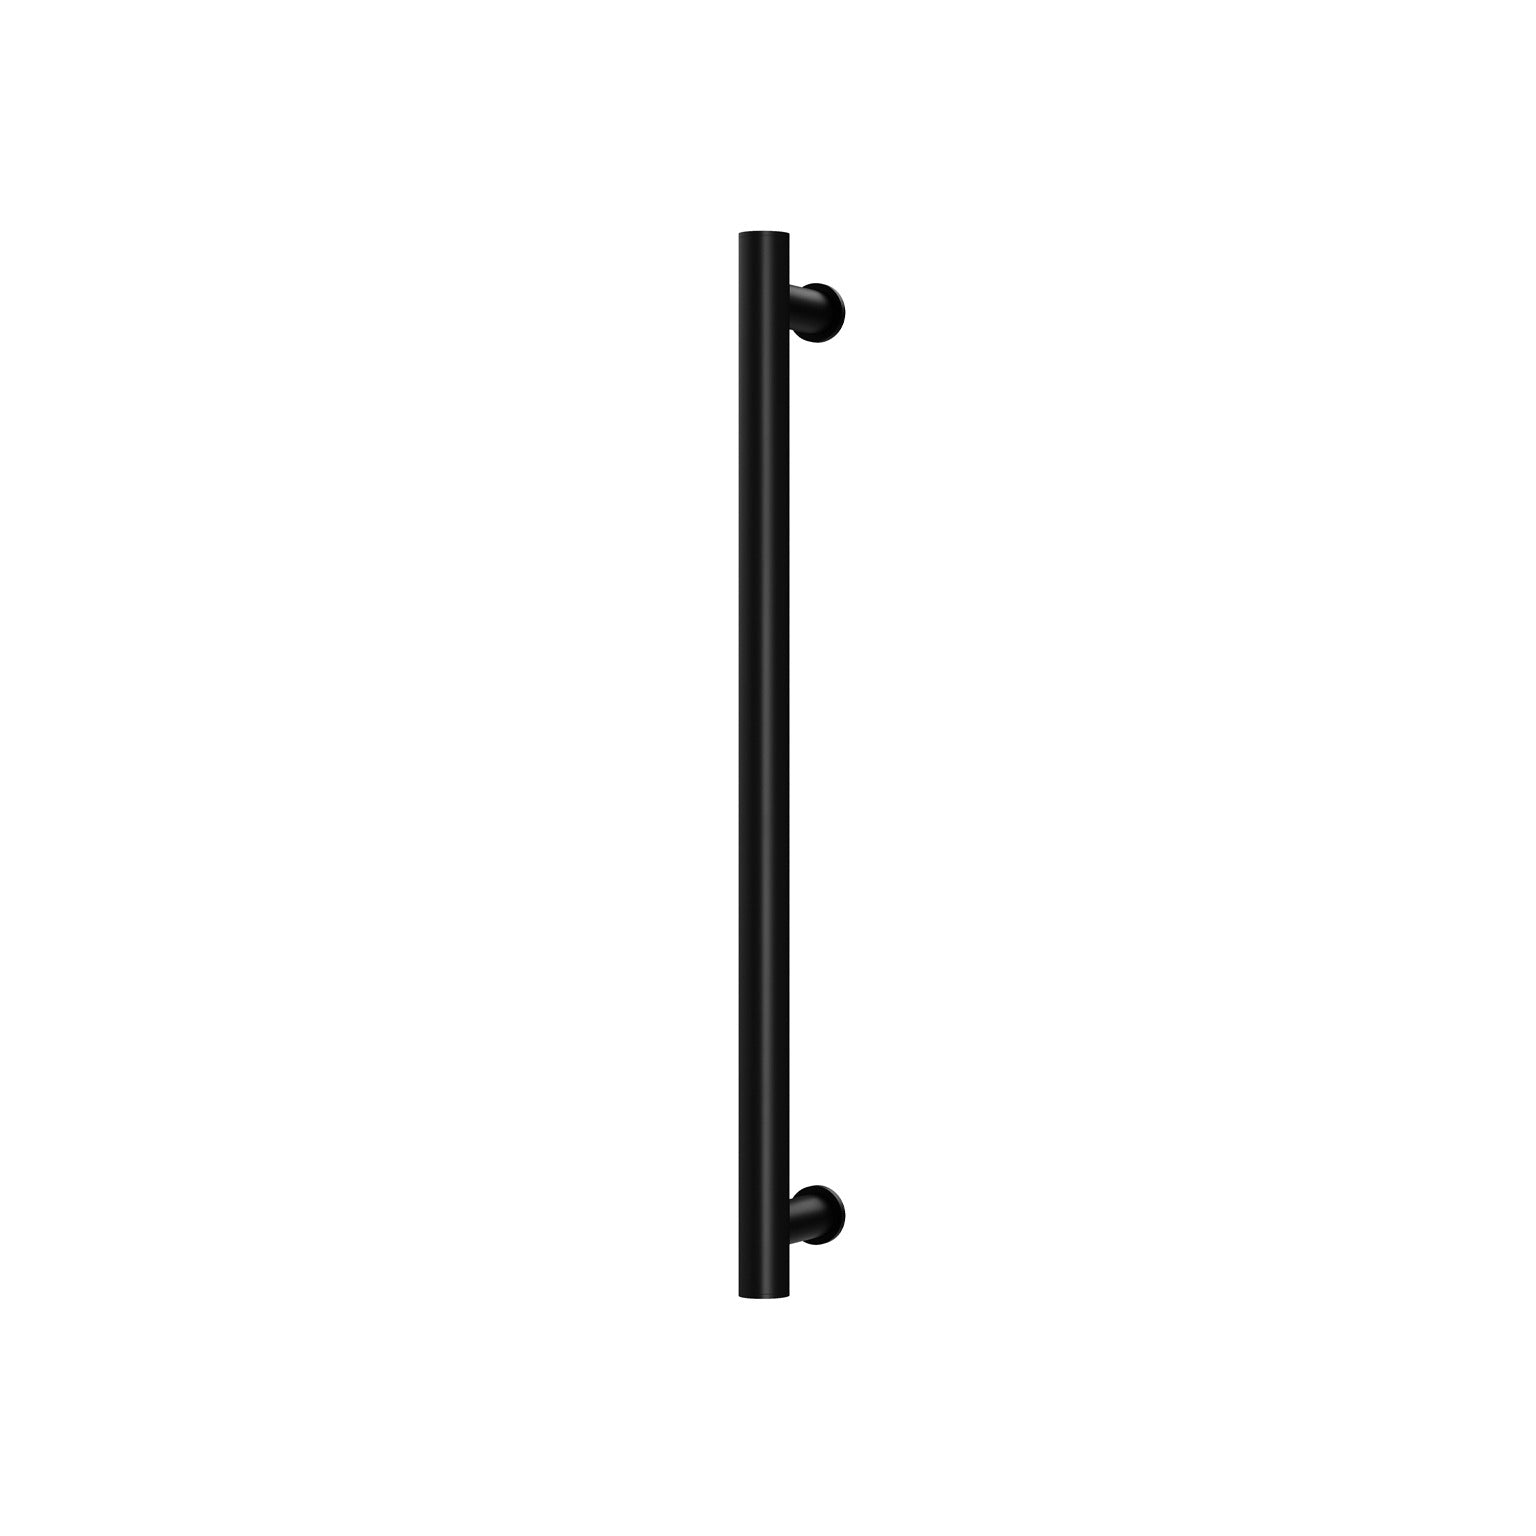 PHOENIX ROUND SINGLE HEATED TOWEL RAIL MATTE BLACK (AVAILABLE IN 600MM AND 800MM)